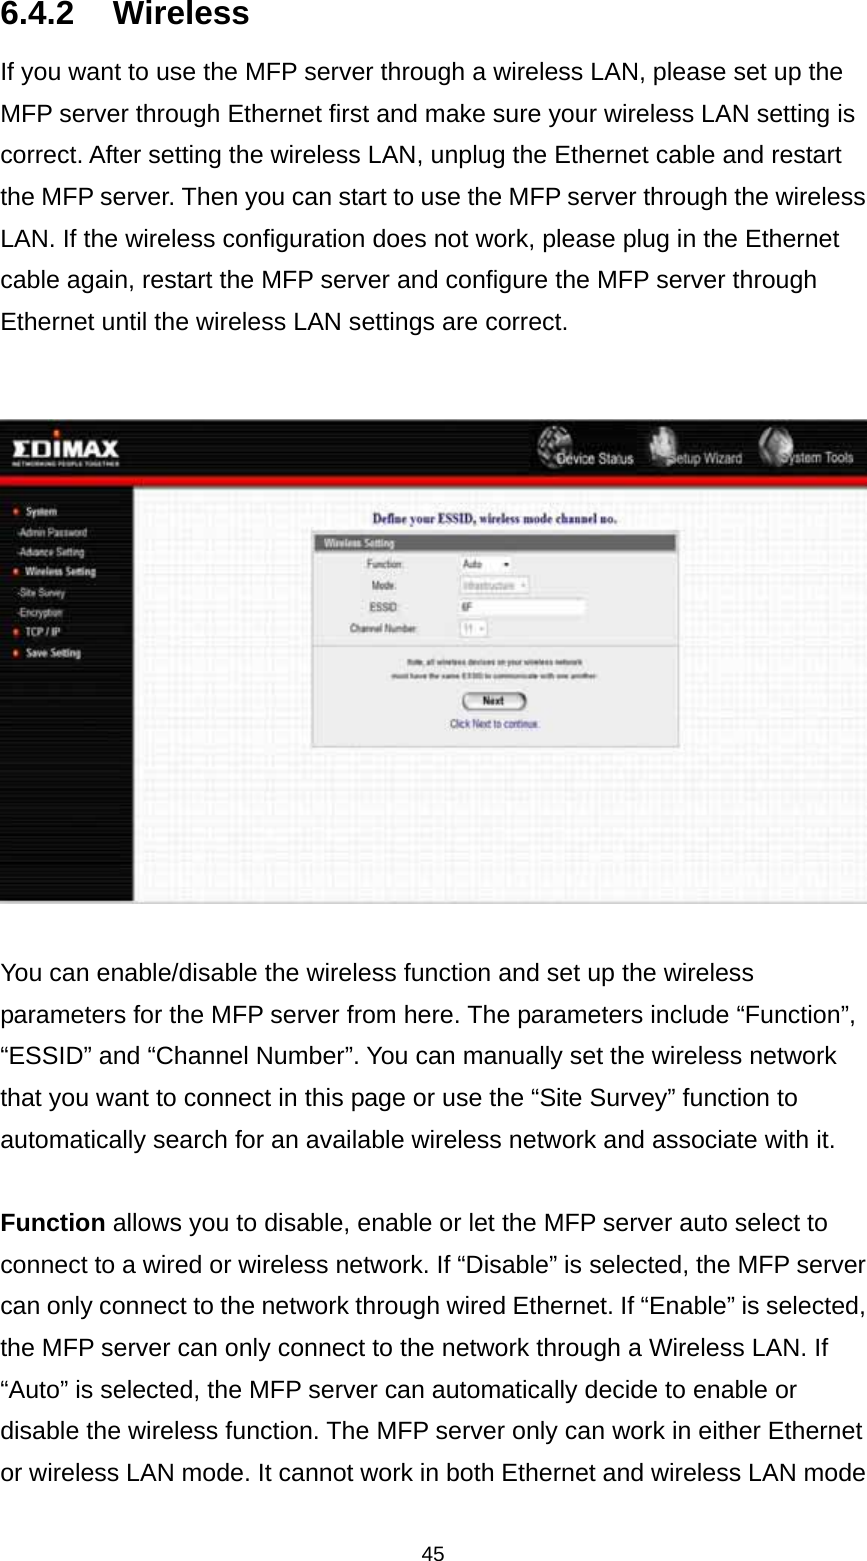 45 6.4.2 Wireless If you want to use the MFP server through a wireless LAN, please set up the MFP server through Ethernet first and make sure your wireless LAN setting is correct. After setting the wireless LAN, unplug the Ethernet cable and restart the MFP server. Then you can start to use the MFP server through the wireless LAN. If the wireless configuration does not work, please plug in the Ethernet cable again, restart the MFP server and configure the MFP server through Ethernet until the wireless LAN settings are correct.     You can enable/disable the wireless function and set up the wireless parameters for the MFP server from here. The parameters include “Function”, “ESSID” and “Channel Number”. You can manually set the wireless network that you want to connect in this page or use the “Site Survey” function to automatically search for an available wireless network and associate with it.  Function allows you to disable, enable or let the MFP server auto select to connect to a wired or wireless network. If “Disable” is selected, the MFP server can only connect to the network through wired Ethernet. If “Enable” is selected, the MFP server can only connect to the network through a Wireless LAN. If “Auto” is selected, the MFP server can automatically decide to enable or disable the wireless function. The MFP server only can work in either Ethernet or wireless LAN mode. It cannot work in both Ethernet and wireless LAN mode 